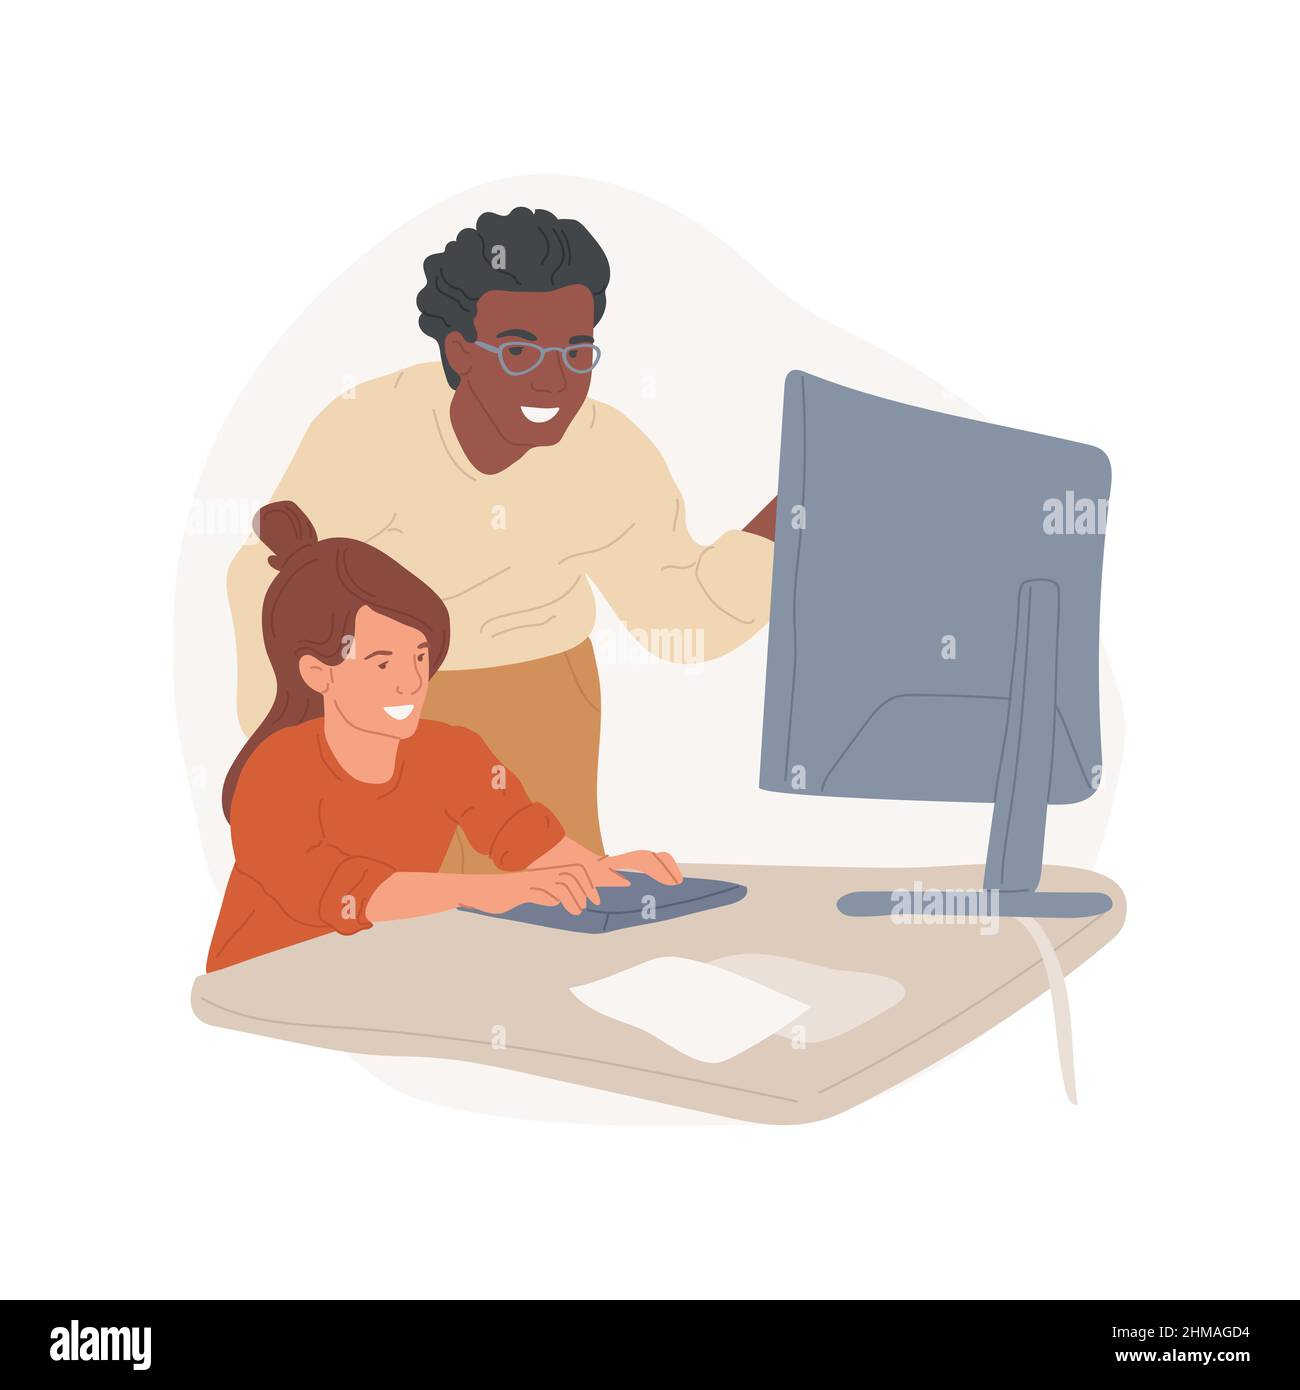 Computer science tutor isolated cartoon vector illustration. Computer literacy class, science and tech one-on-one tutoring, make hardware project with tutor, learn software cartoon vector. Stock Vector